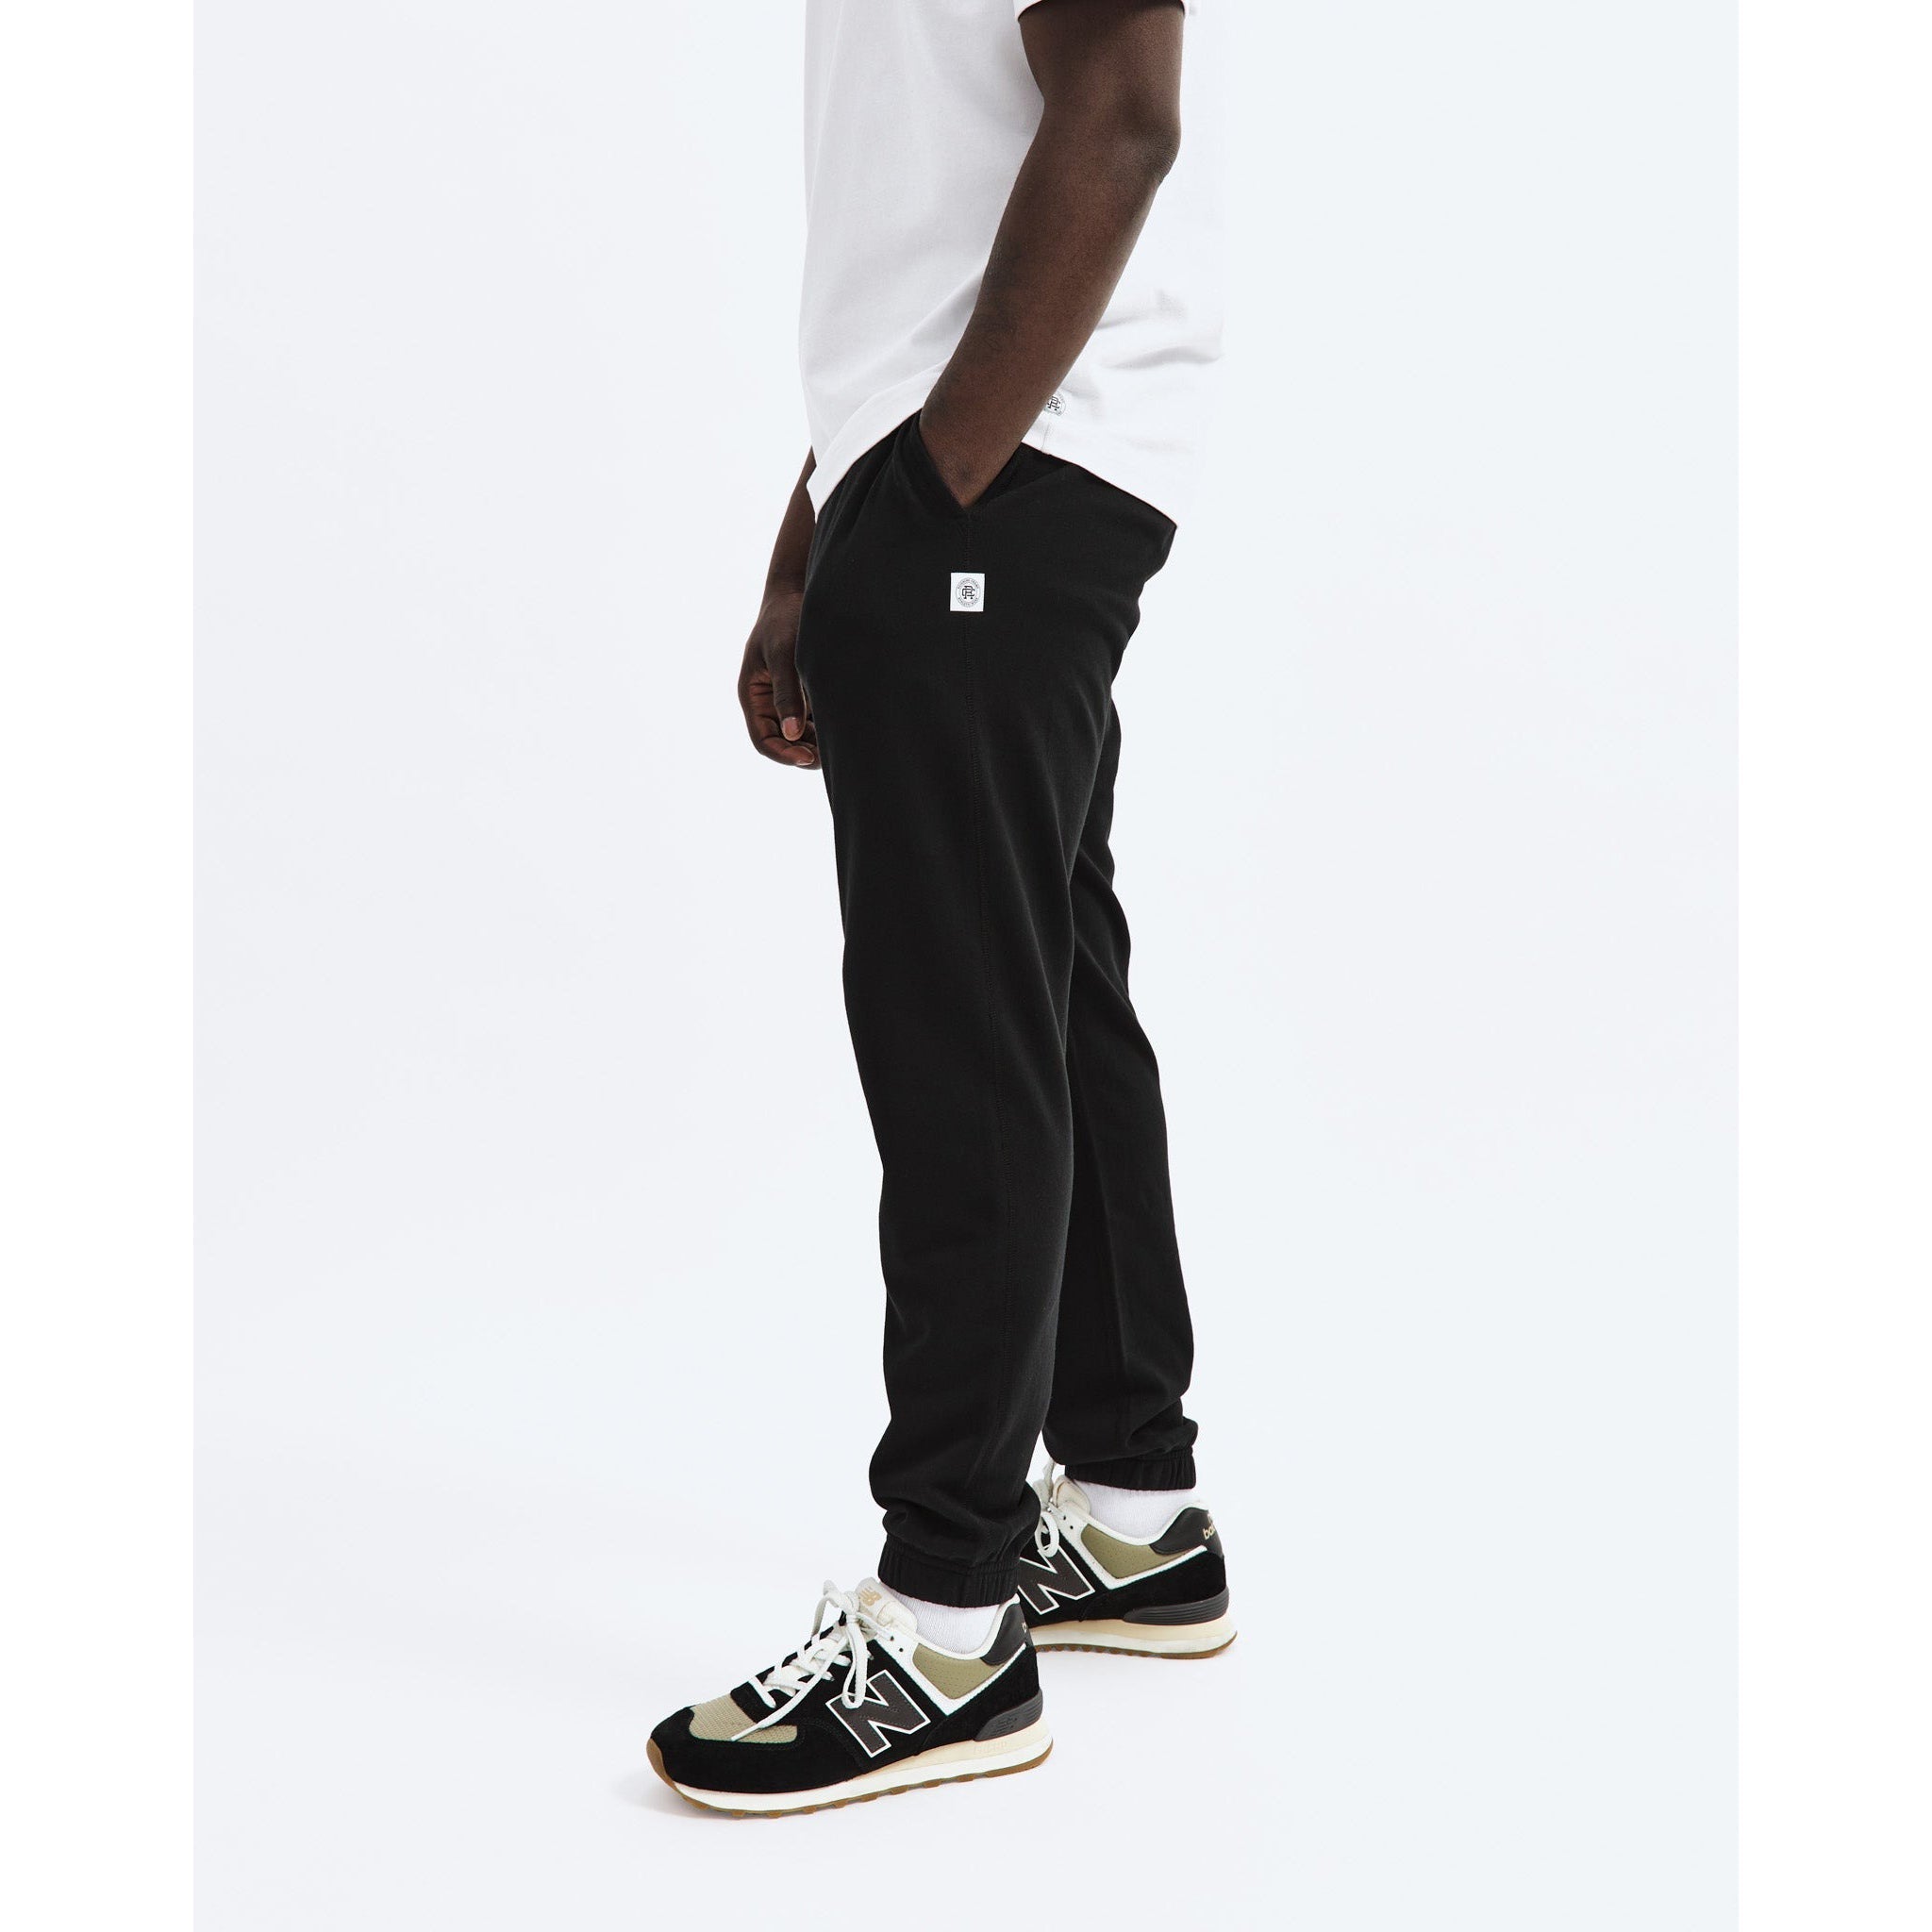 Reigning Champ Men Lightweight Terry Cuffed Sweatpant Black RC-5443-BLK - BOTTOMS - Canada